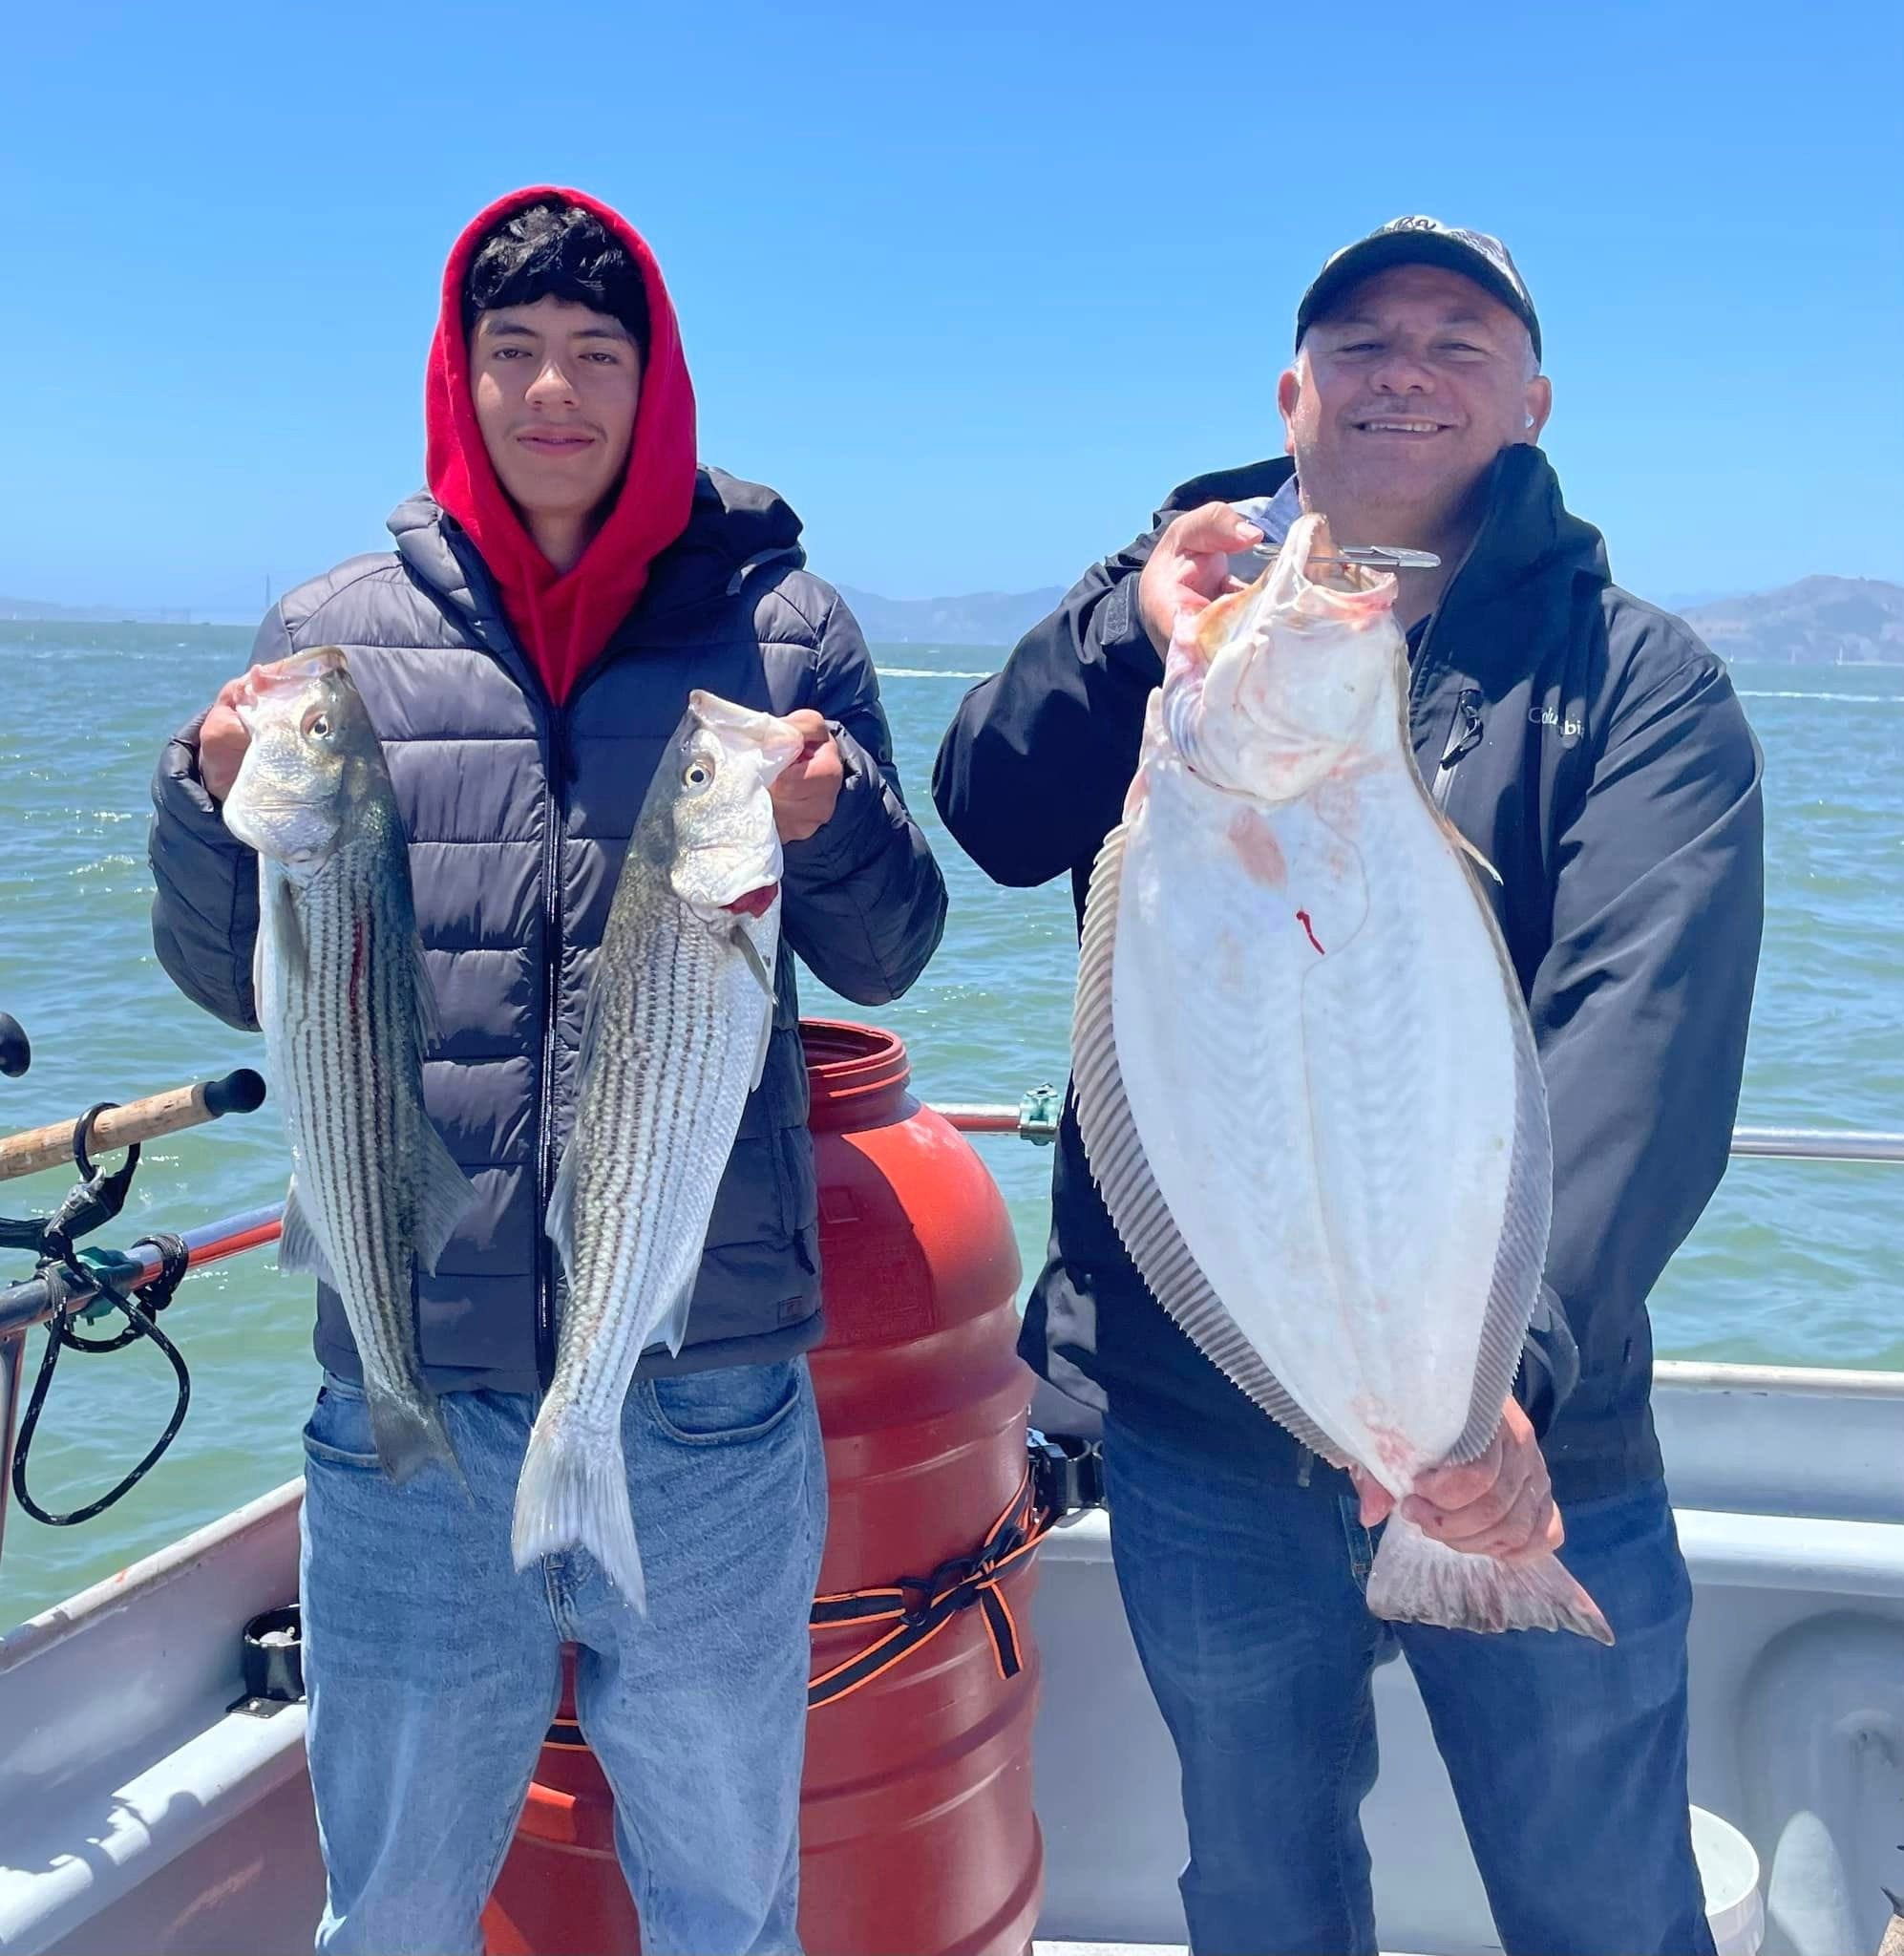 'Another fantastic day on the bay': Halibut, striped bass fishing sizzles in San Fransisco